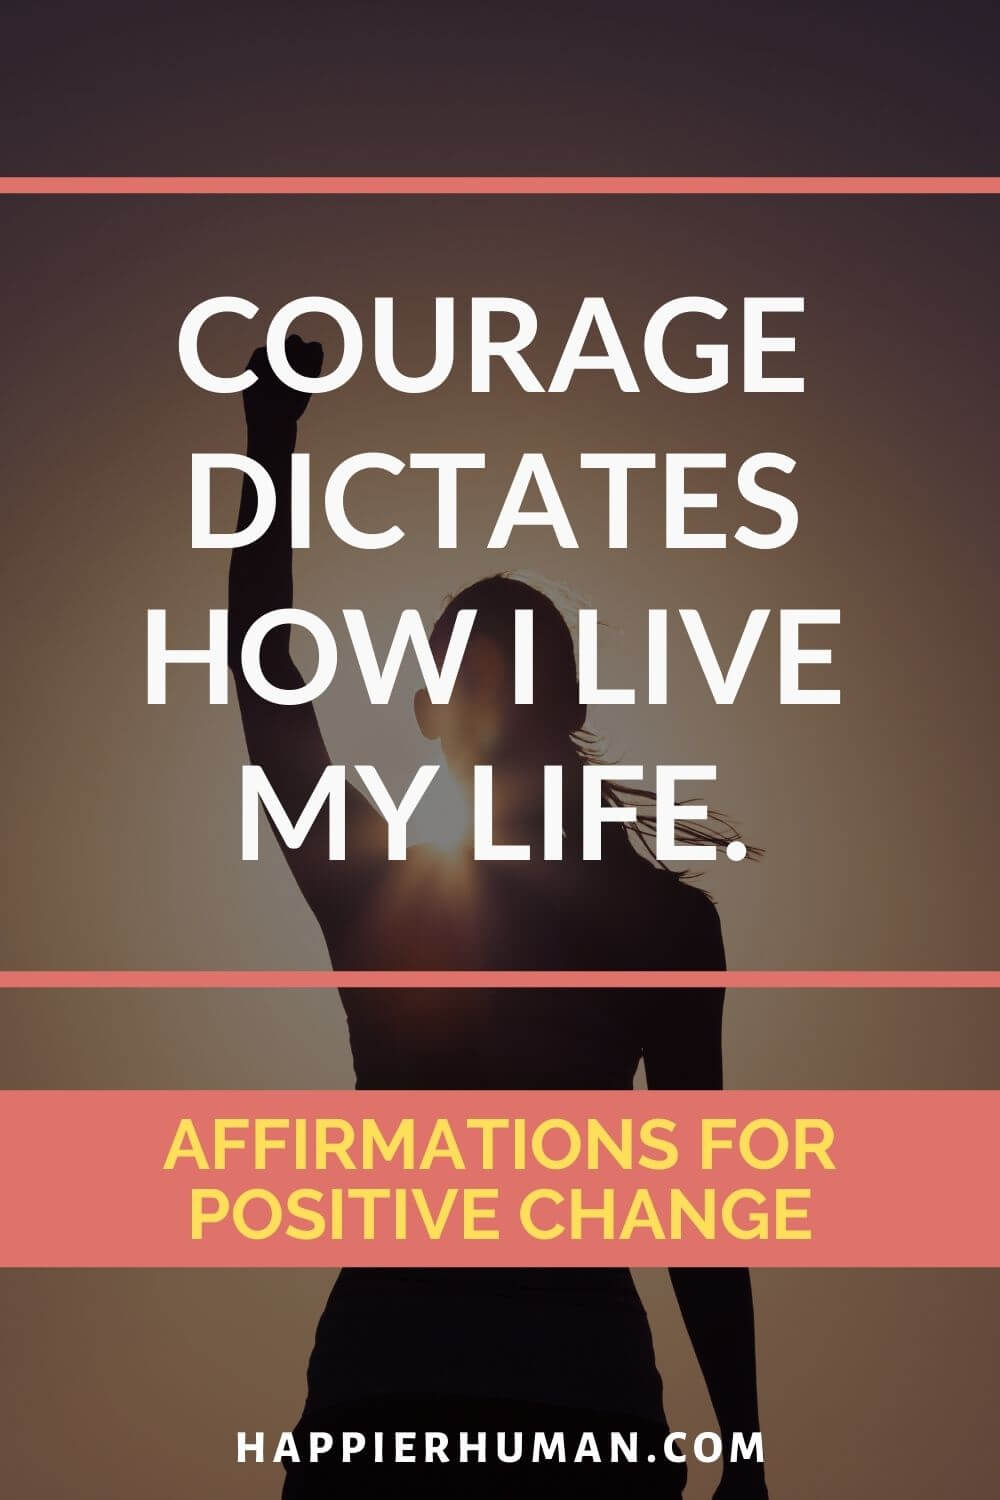 Affirmations for Change - Courage dictates how I live my life. | 42 positive affirmations to change your life | affirmations for fear of change | positive affirmations for mental health pdf